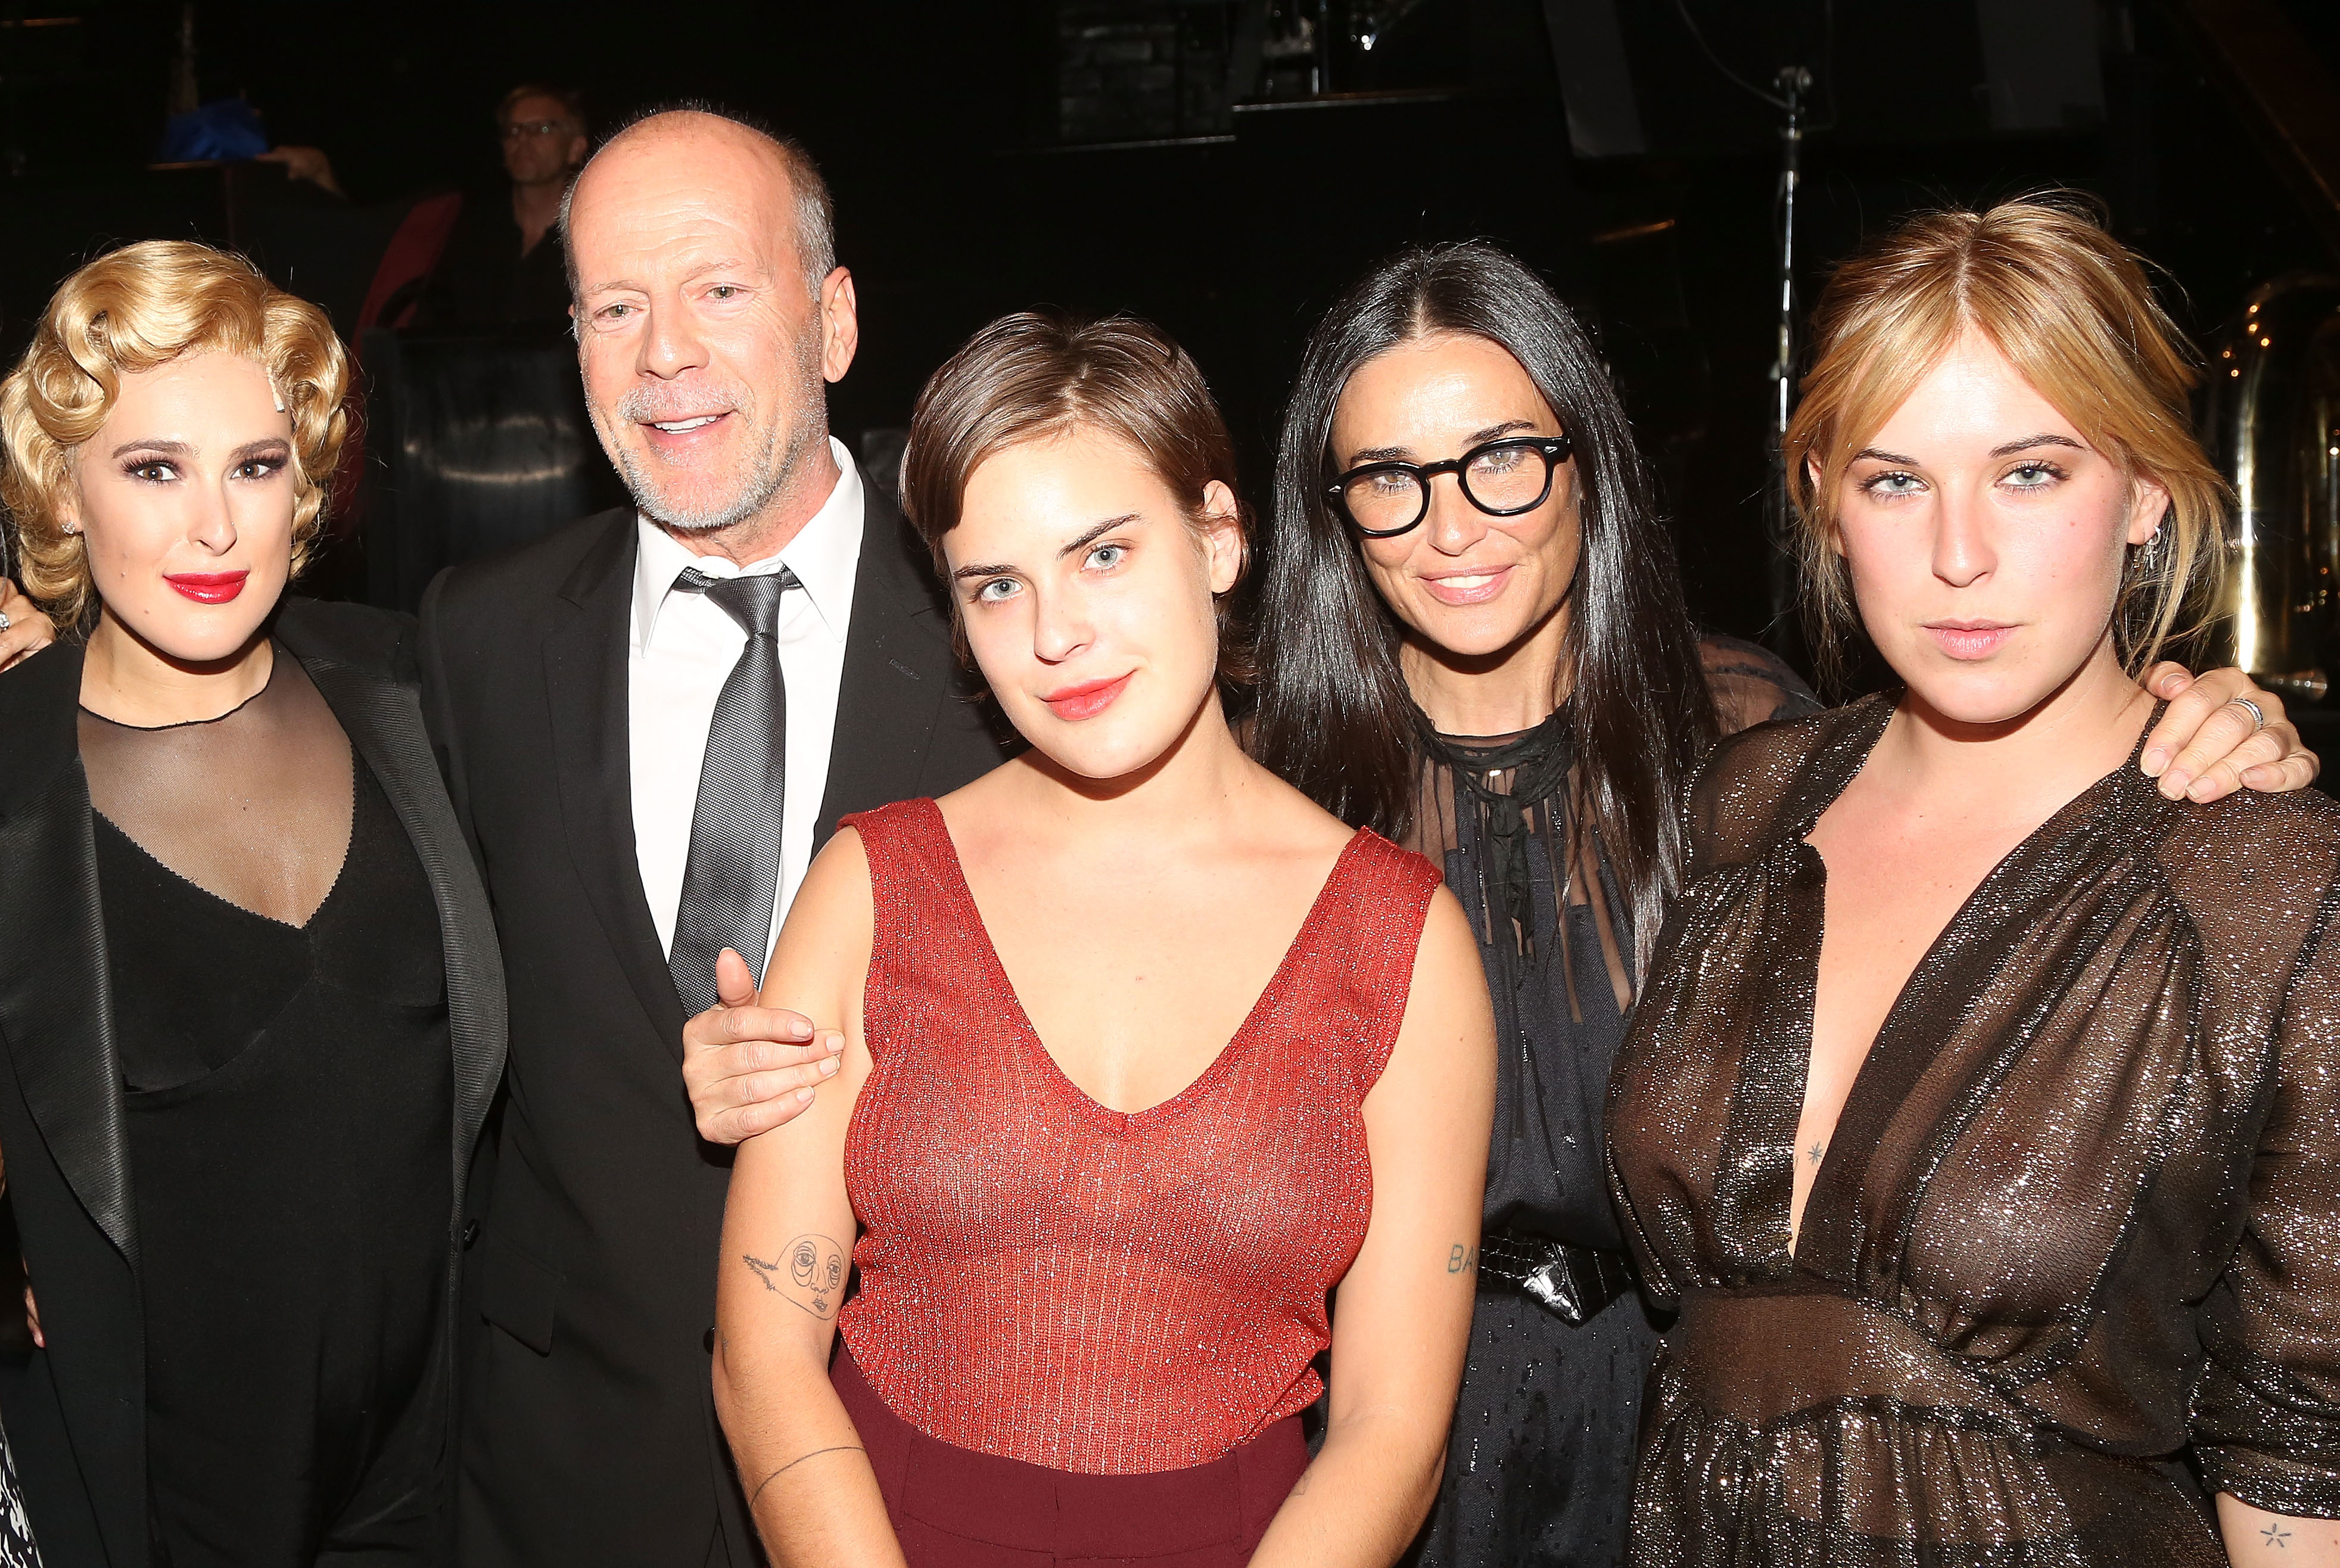 Rumer Willis, Bruce Willis, Tallulah Belle Willis, Demi Moore, and Scout LaRue Willis as Rumer makes her broadway debut as "Roxie Hart" in "Chicago" on September 21, 2015, in New York City. | Source: Getty Images